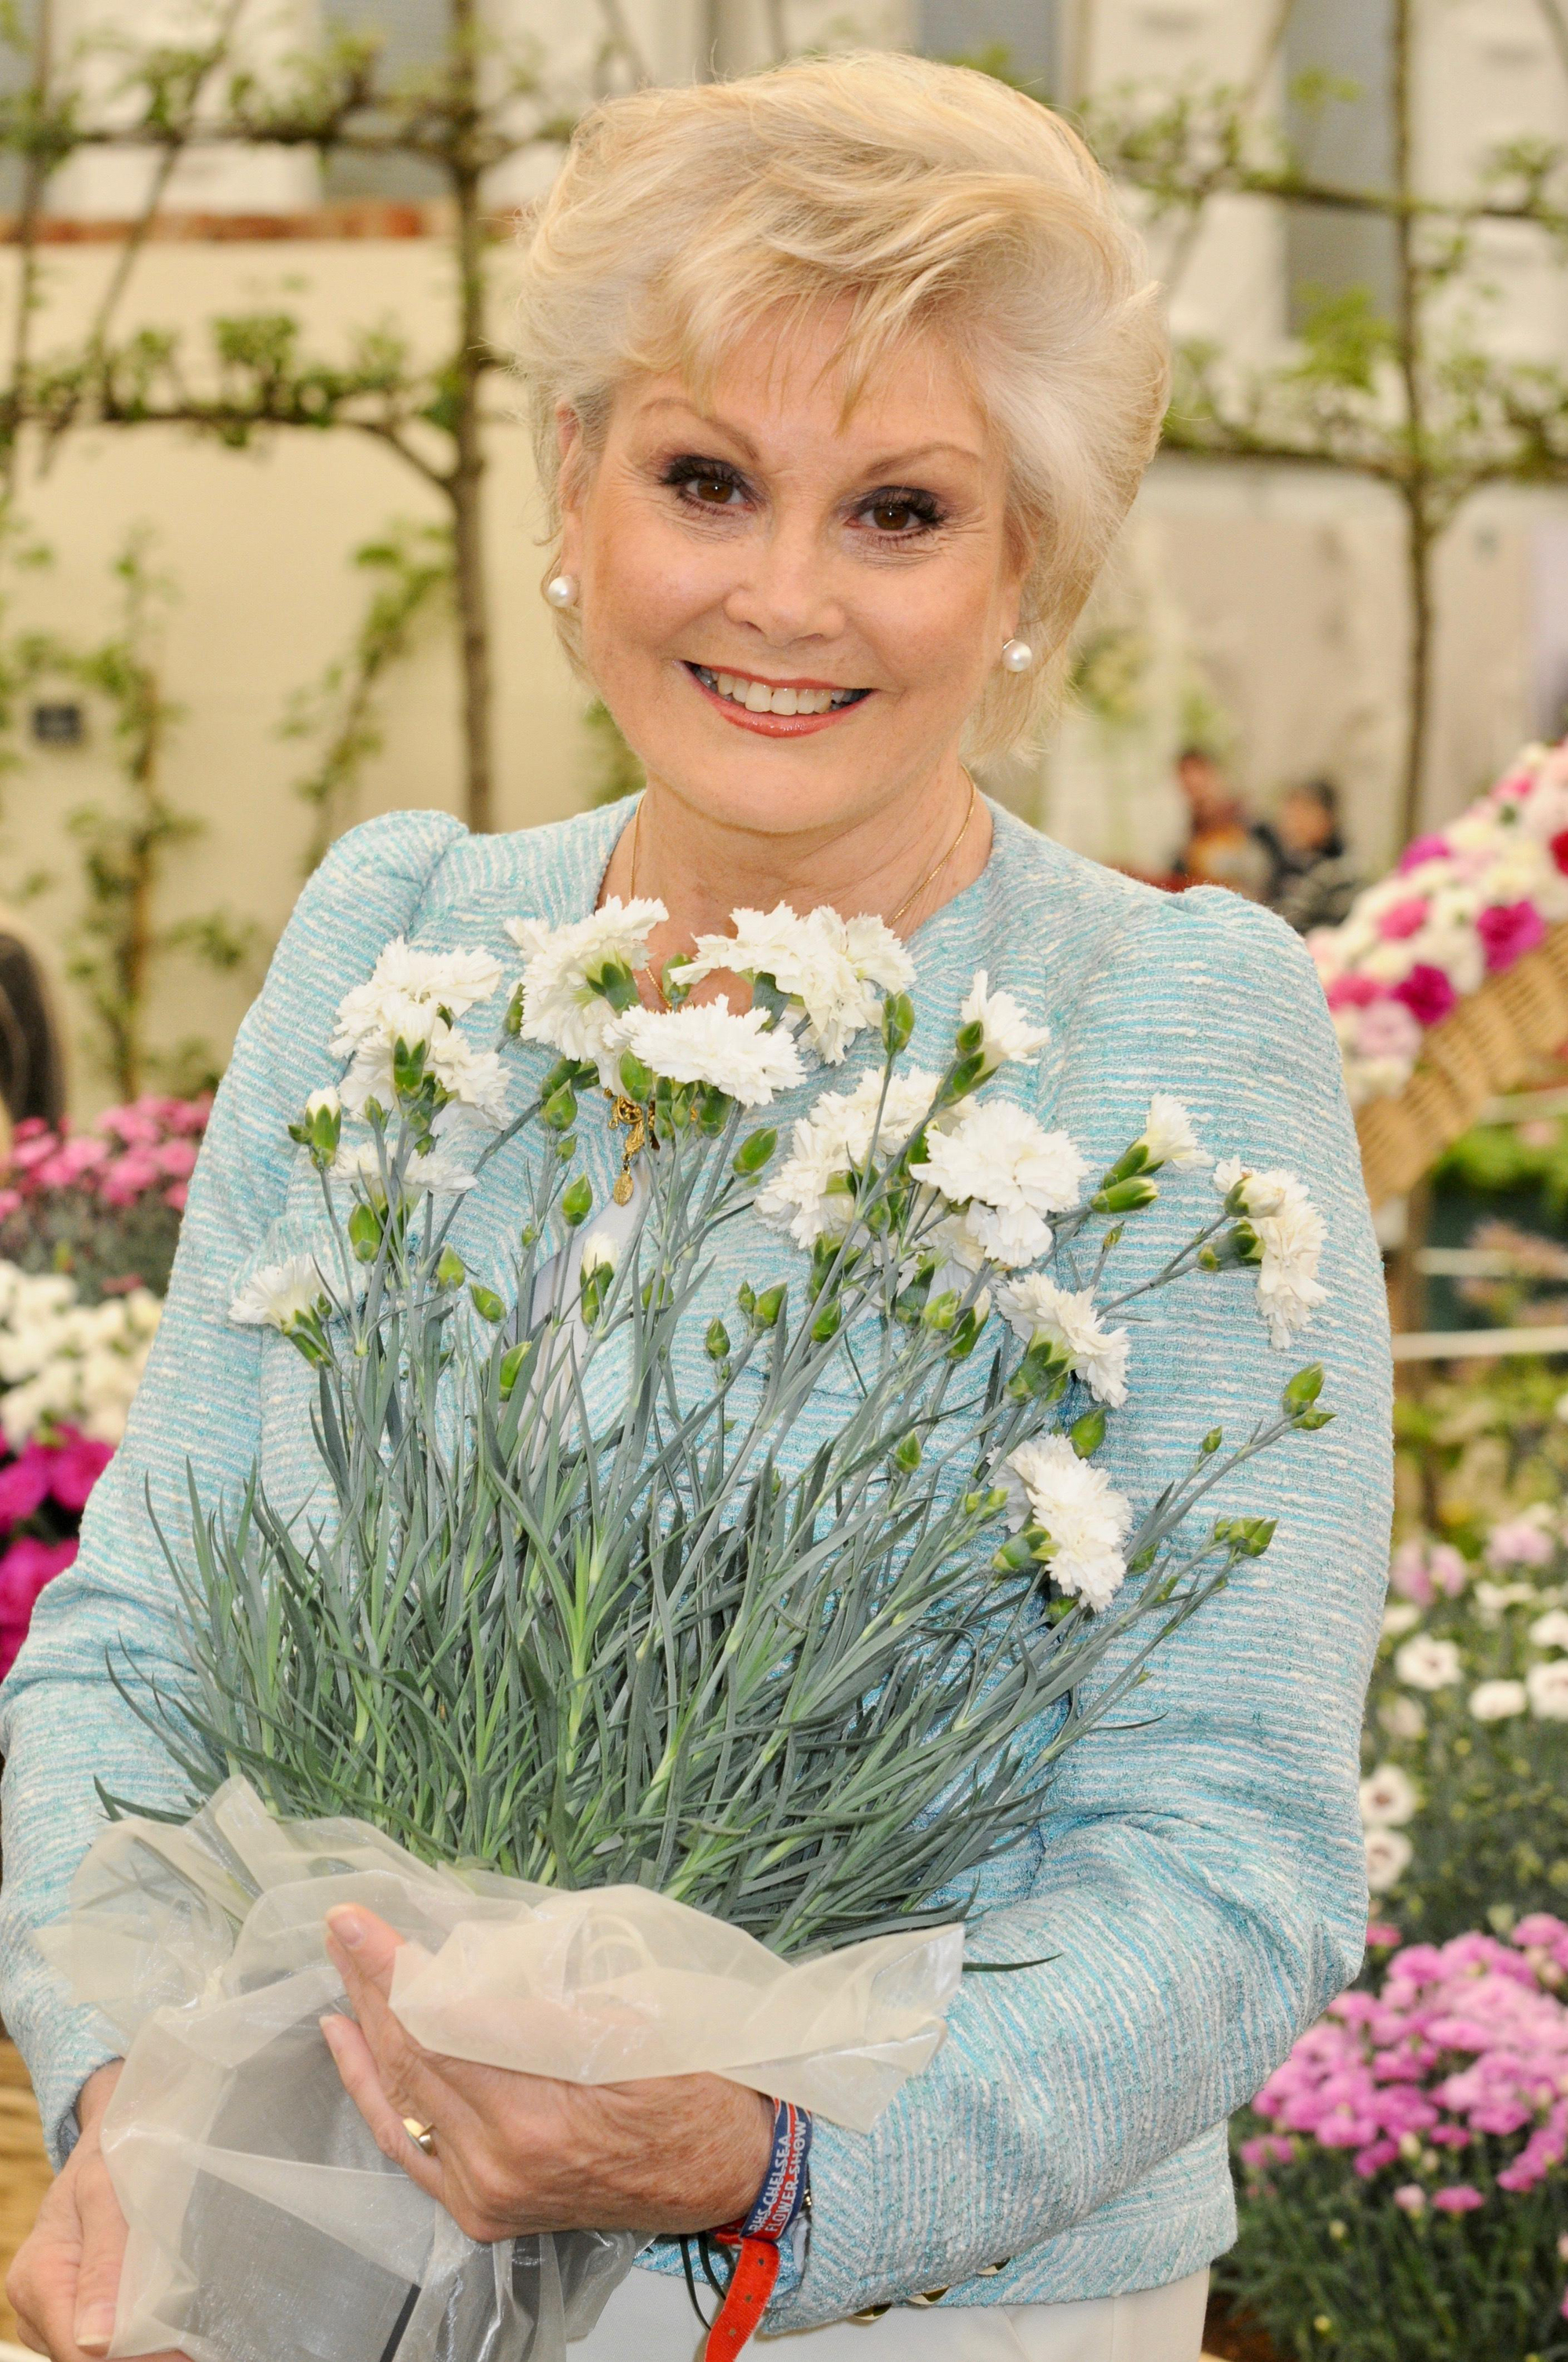 Angela Rippon carrying flowers